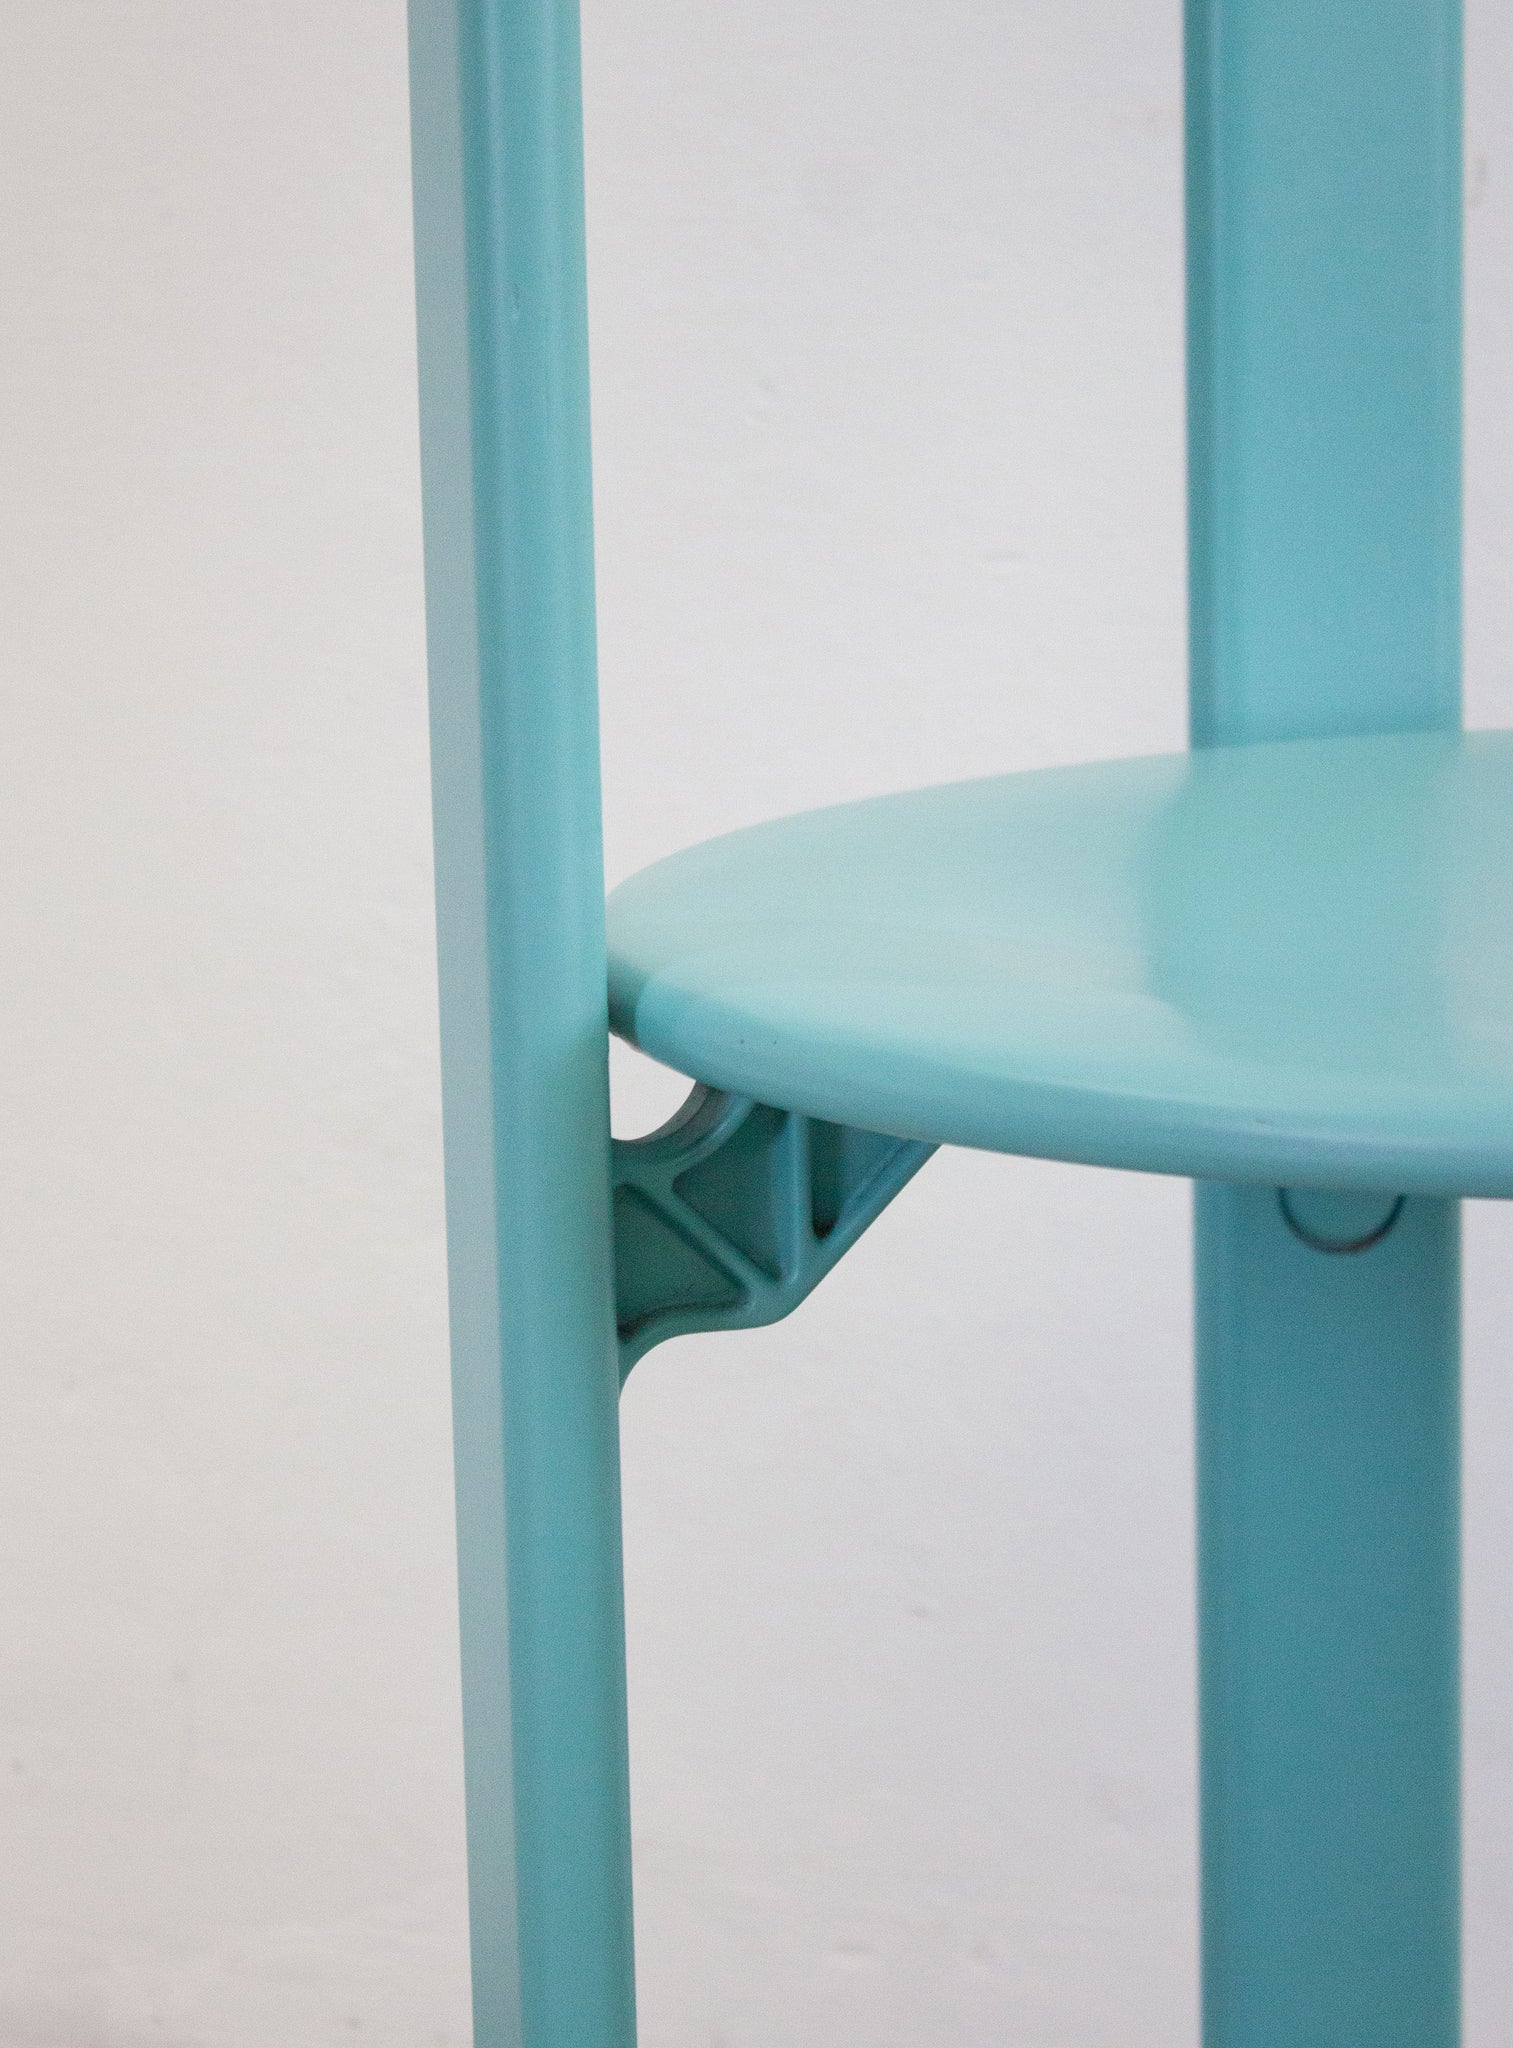 Dietiker Rey Dining Chairs by Bruno Rey (Light Teal Green)